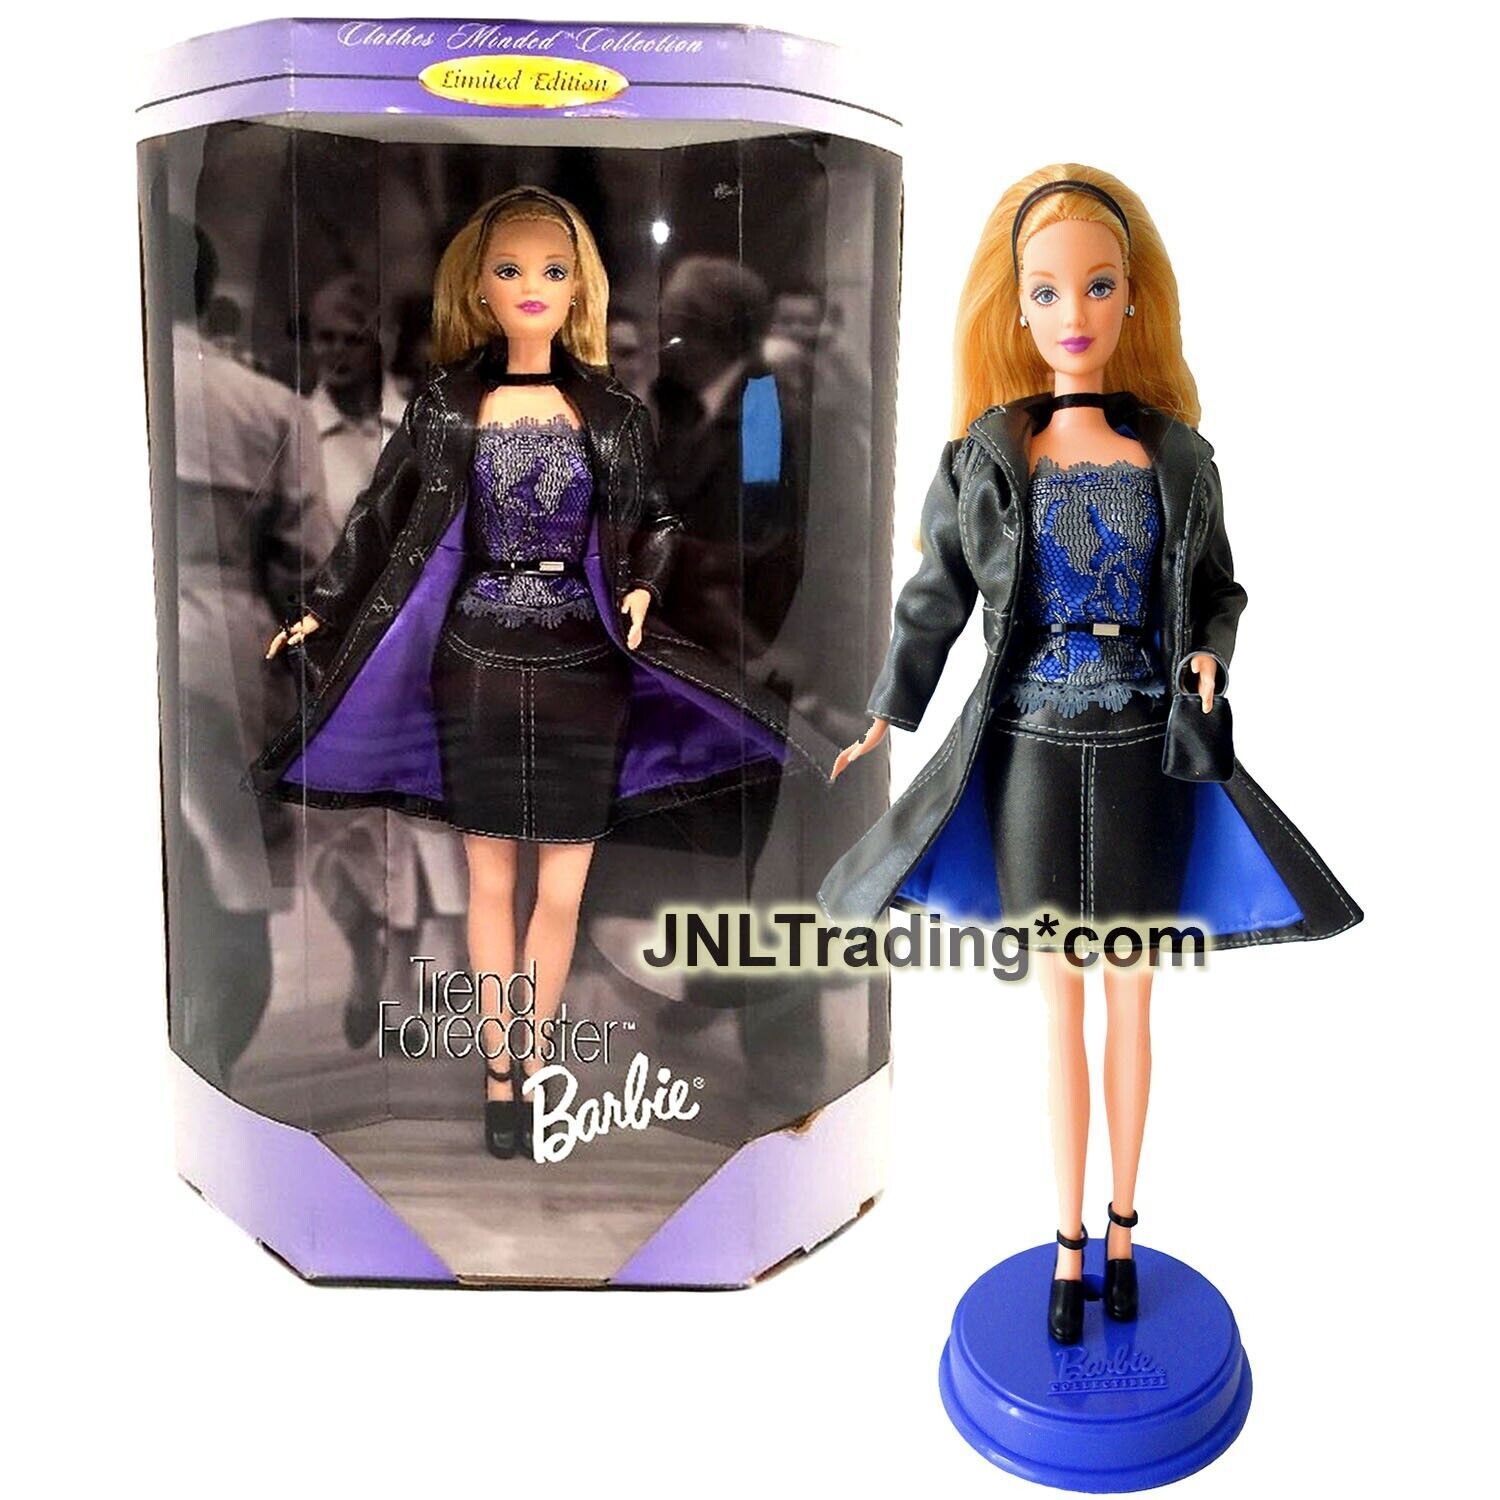 Primary image for Year 1999 Barbie Clothes Minded Collection Doll Caucasian Model TREND FORECASTER